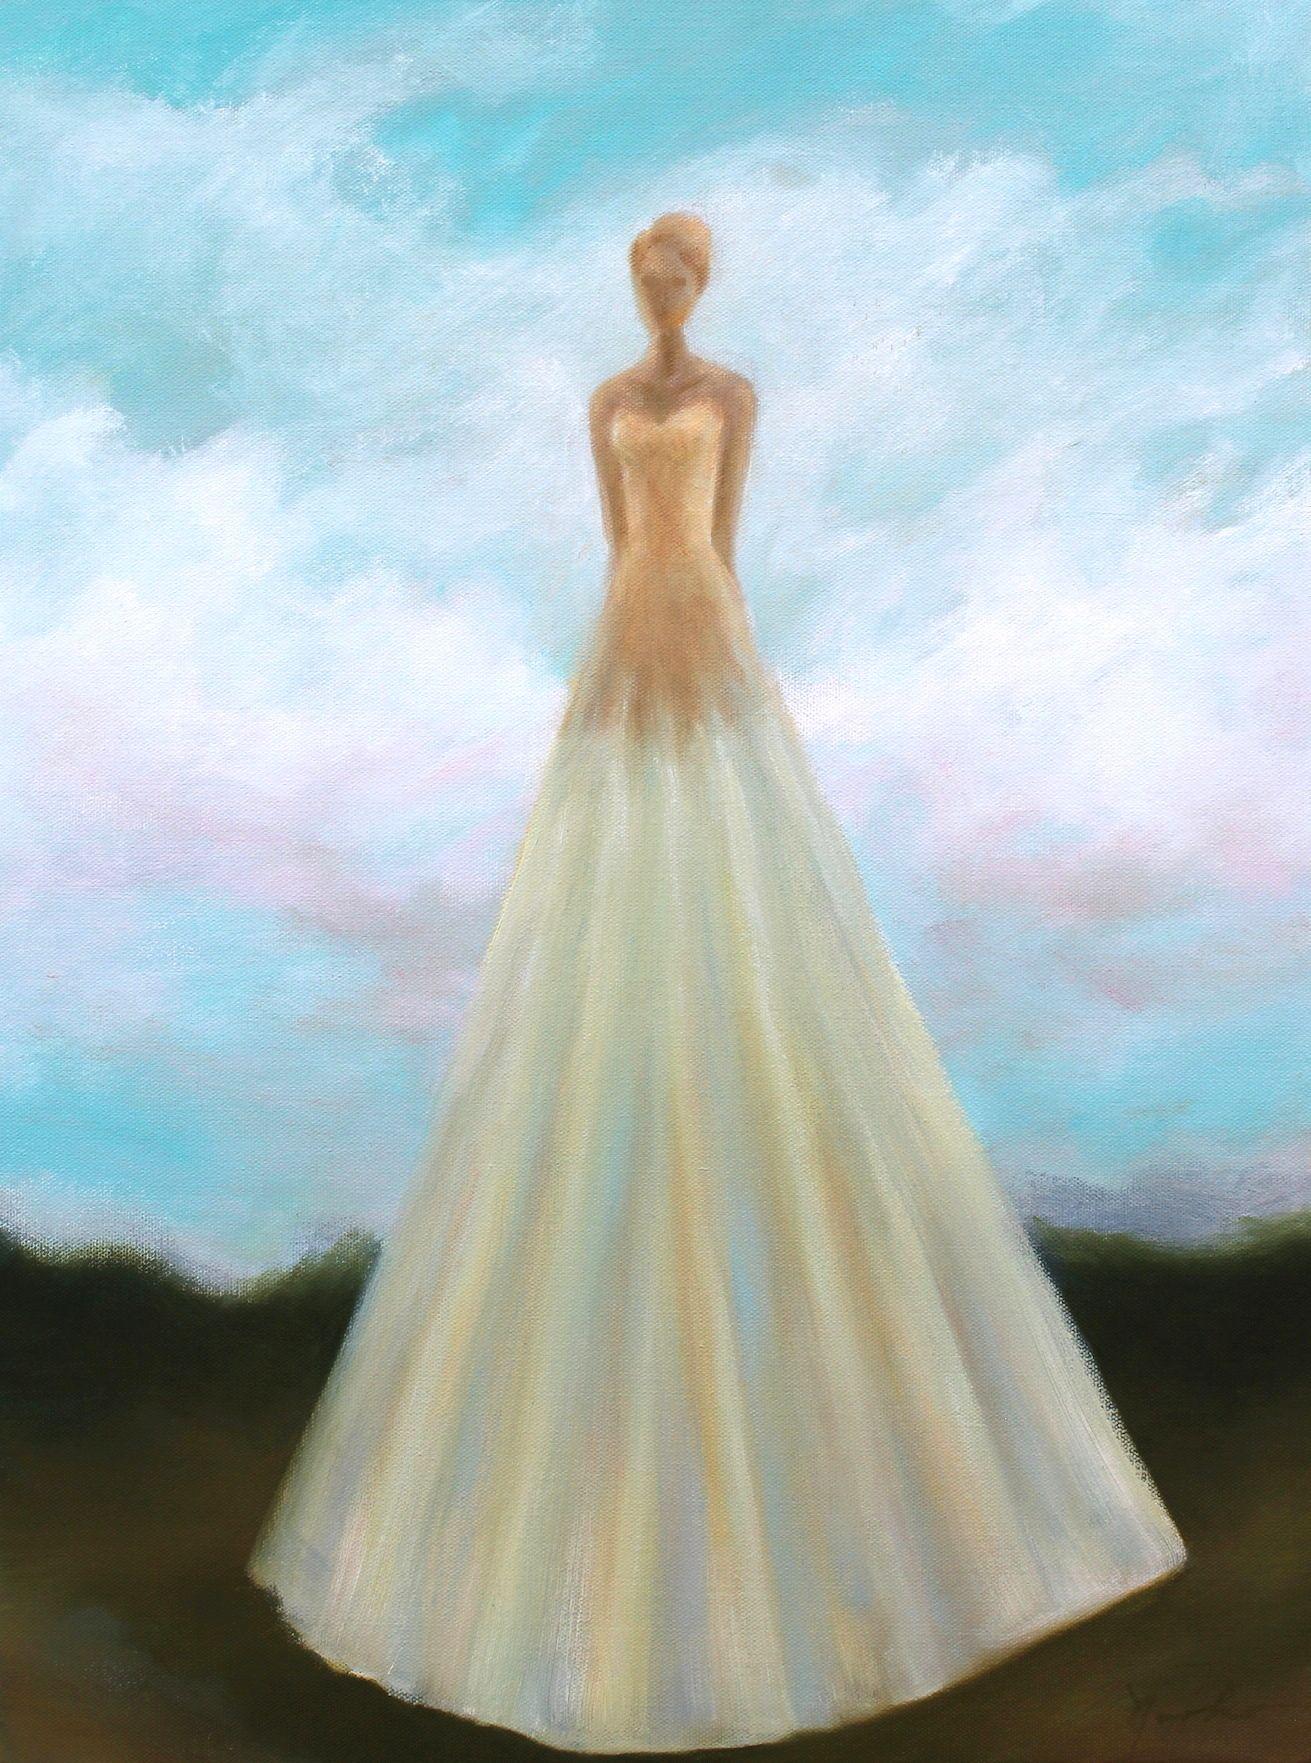 This is "Who Are These Angels CXLVI", an original oil painting on Gallery wrapped canvas. This painting measures 24" x 18" x 1.5 inches and it will be shipped ready to hang. :: Painting :: Contemporary :: This piece comes with an official